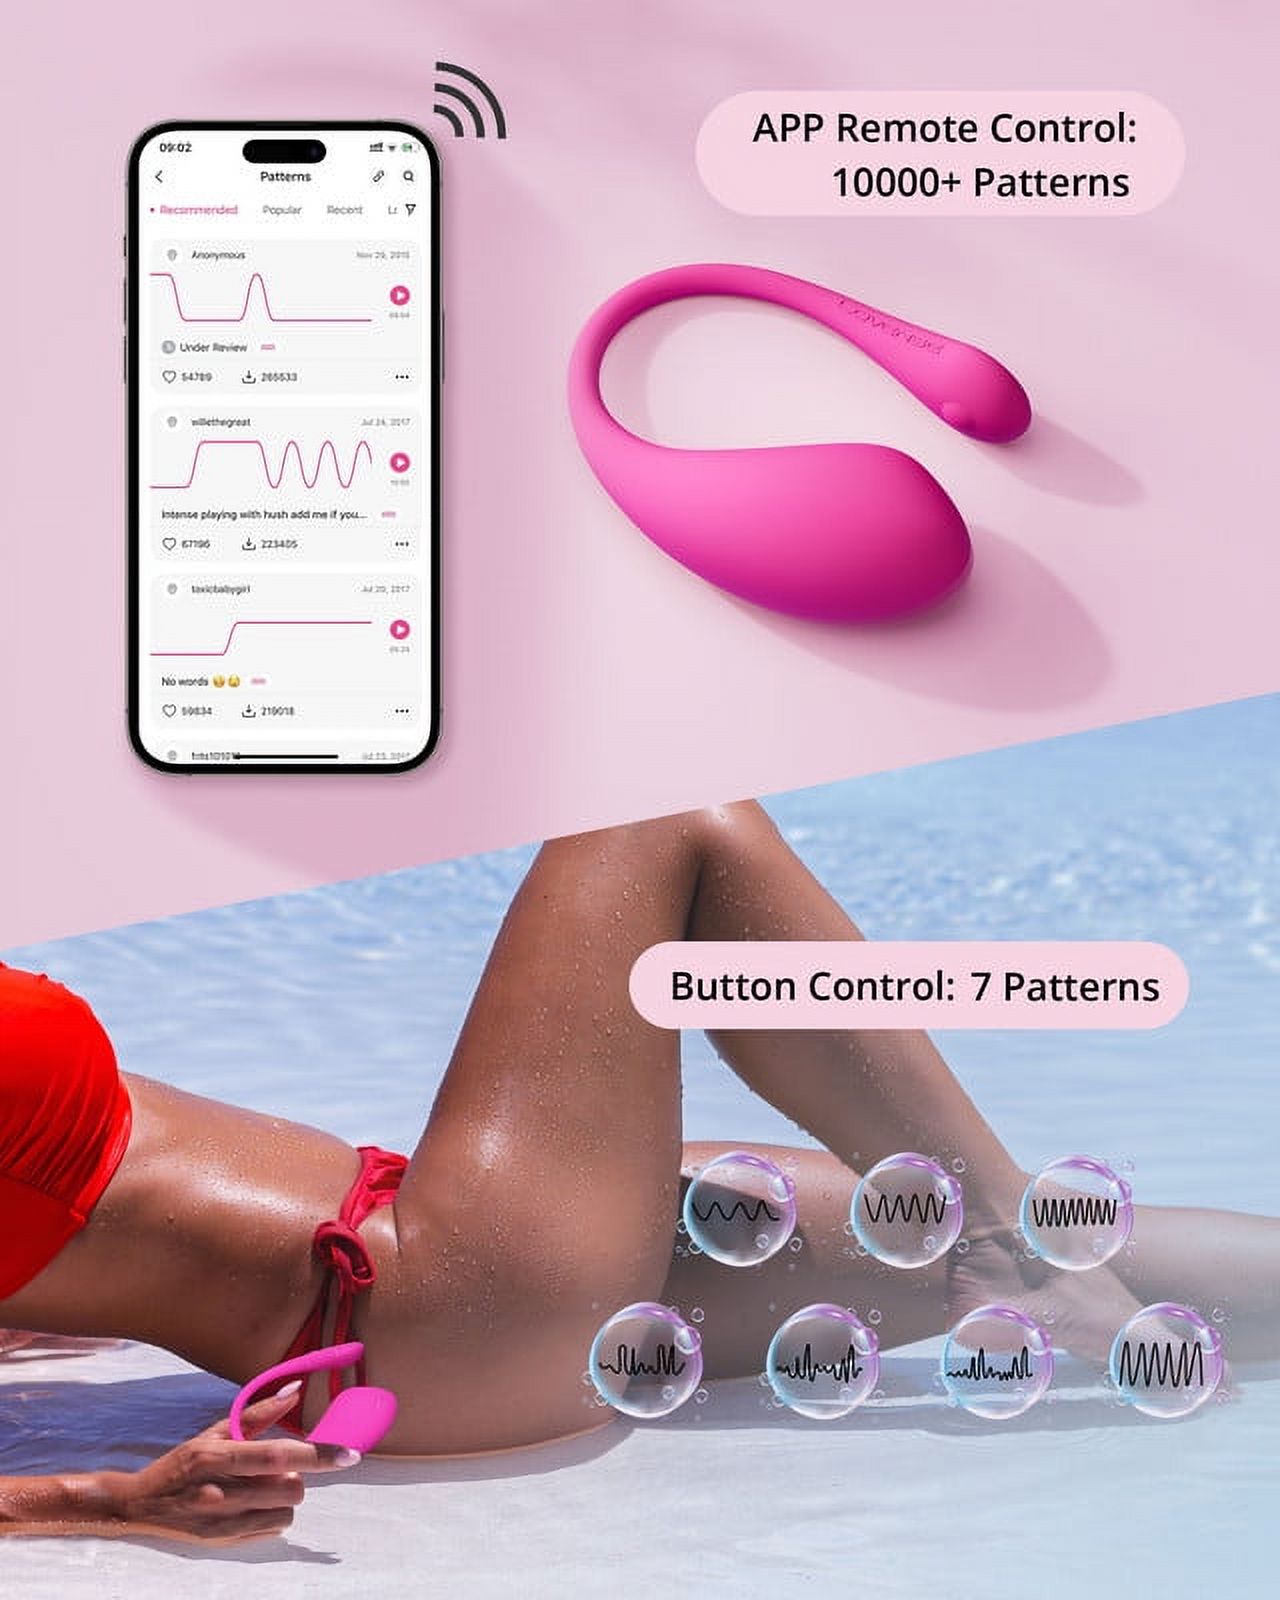 Lovense Lush 3 G Spot Mini Wearable Vibrator for Women with APP Control - image 3 of 6